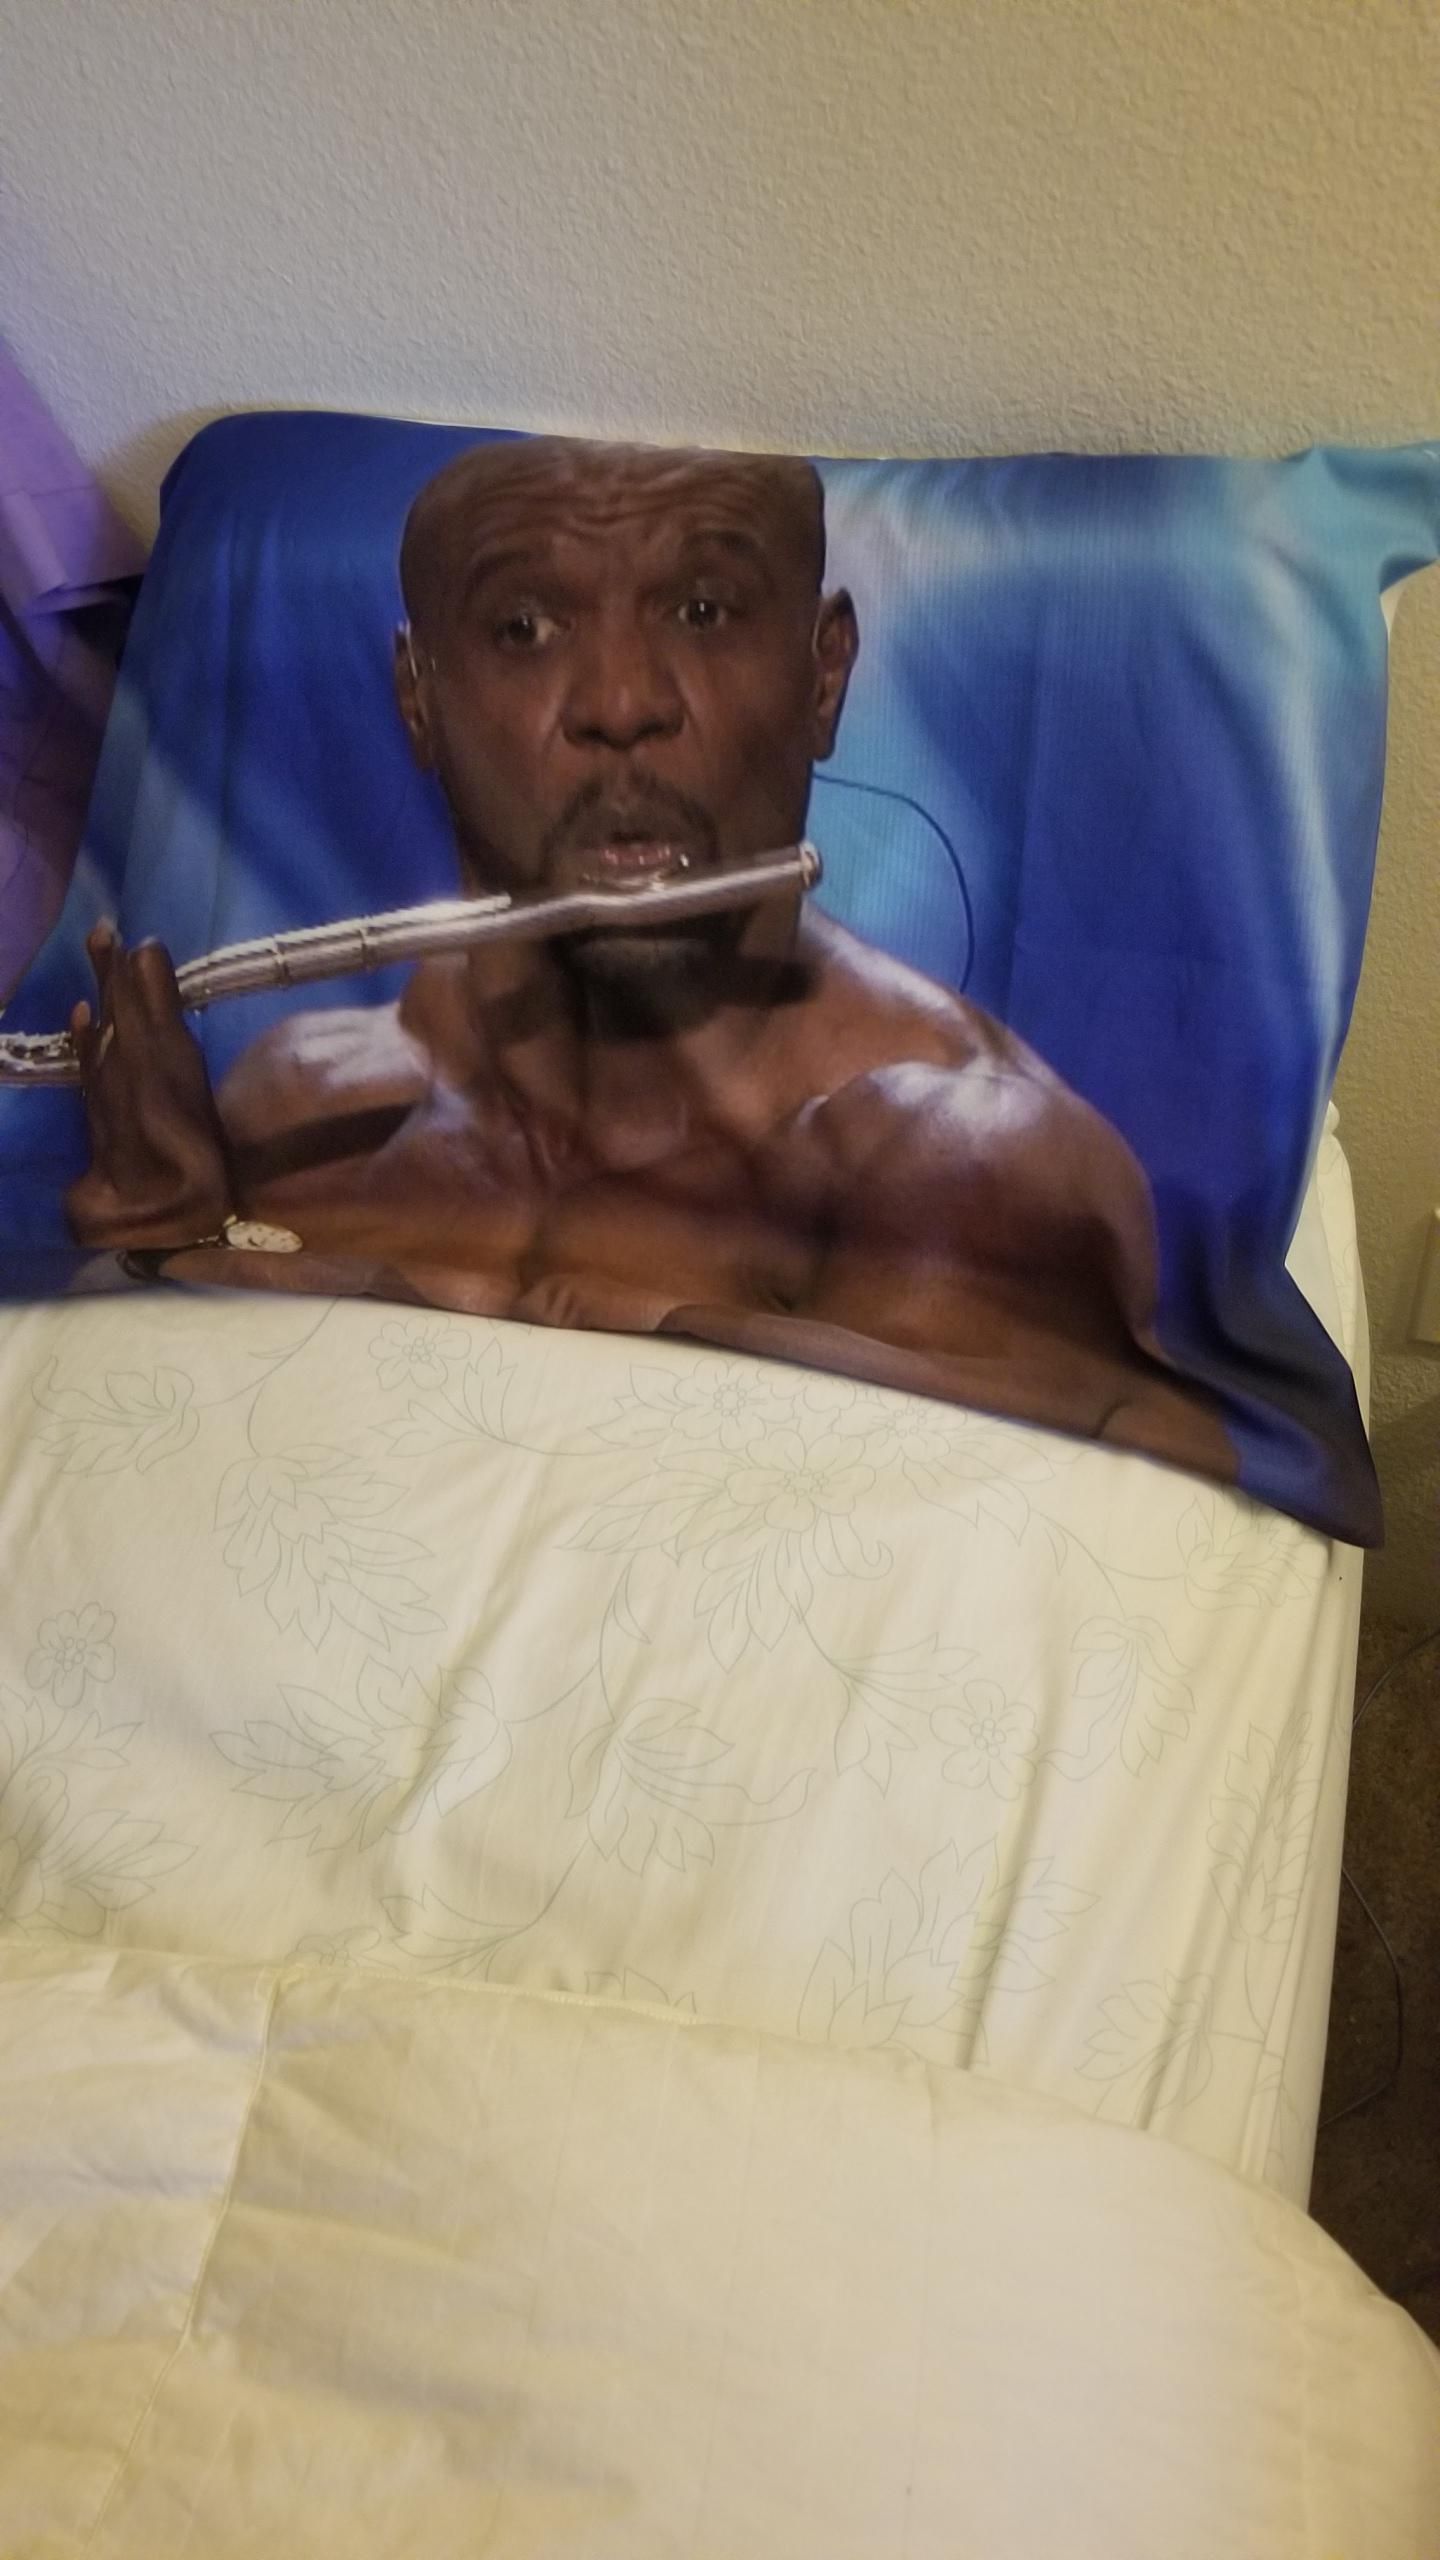 My gf asked me to get Terry Crews in bed with her, so I got this pillowcase made.